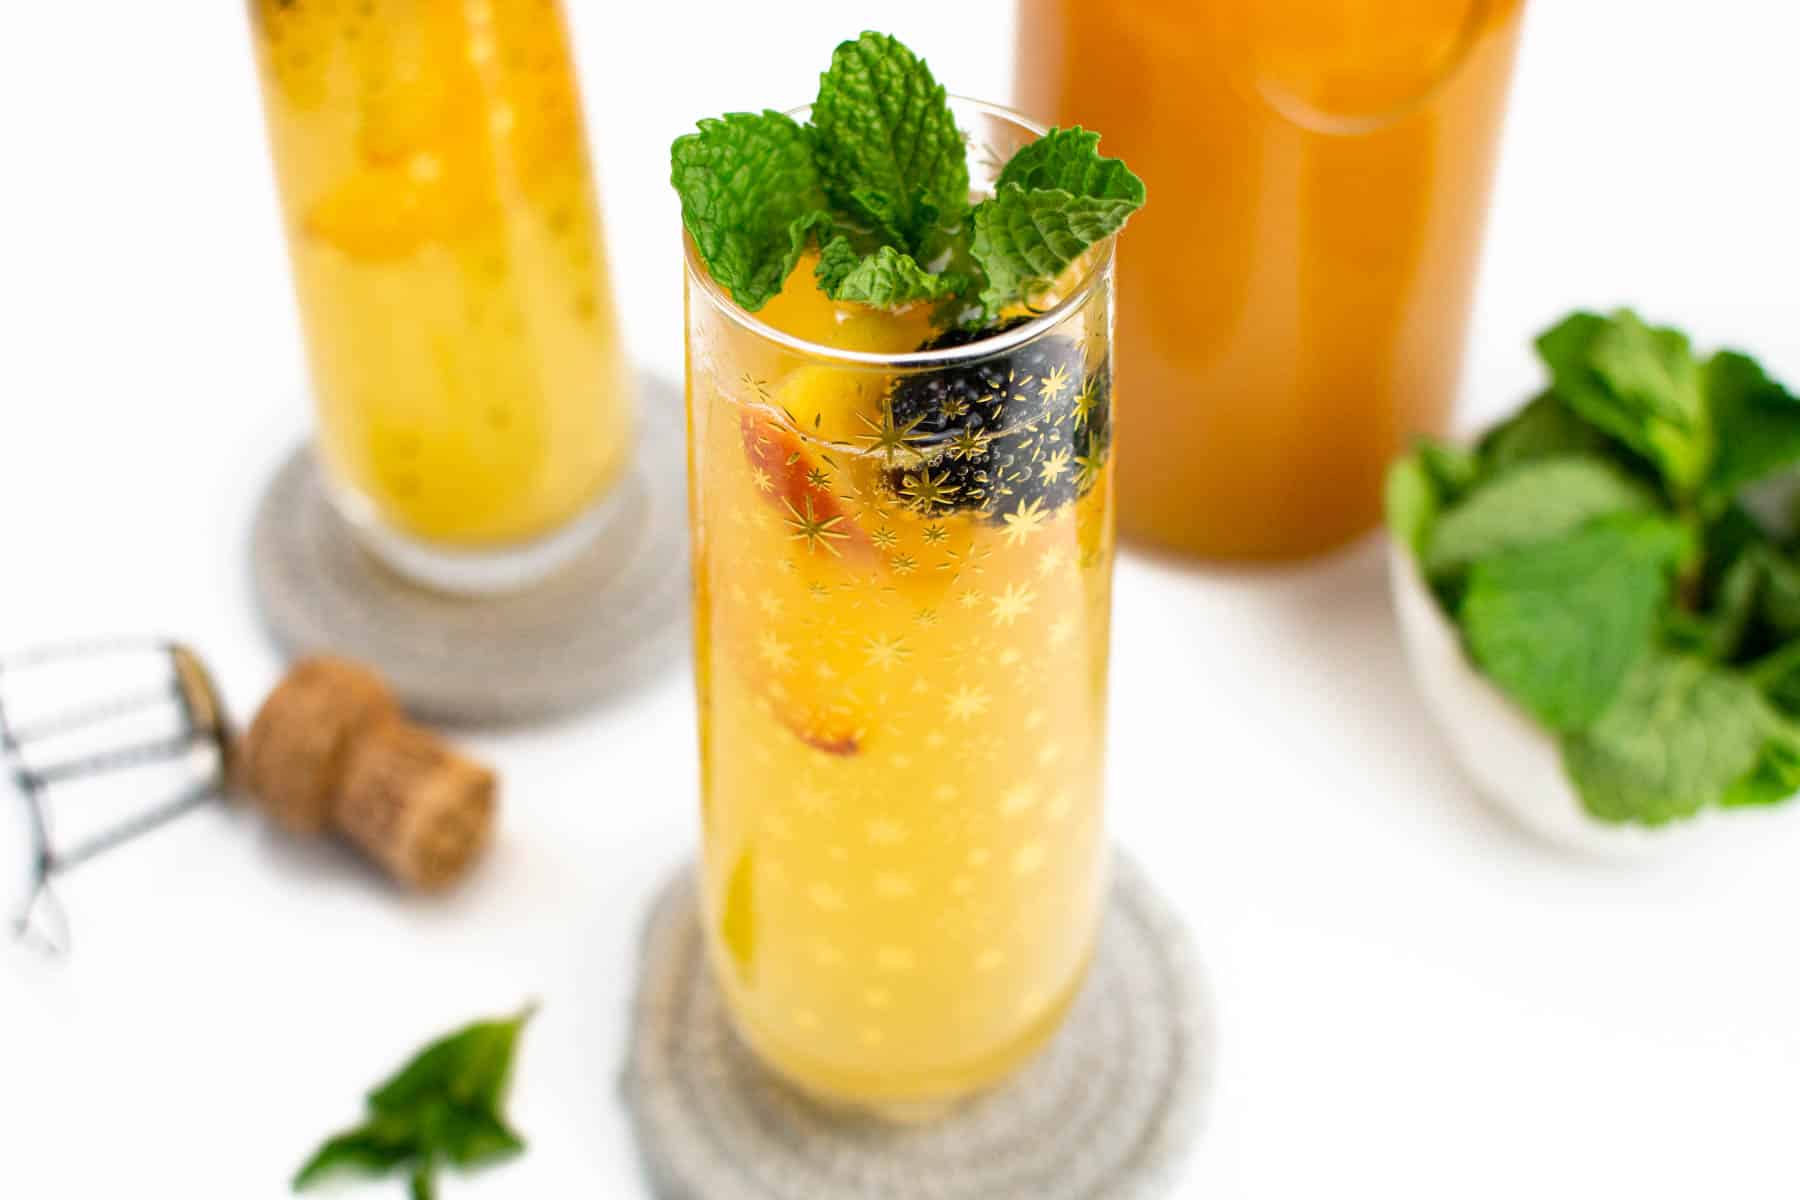 Two peach bellinis sit on woven coasters alongside a bowl of fresh mint, a cork and its cage and a pitcher of peach juice.